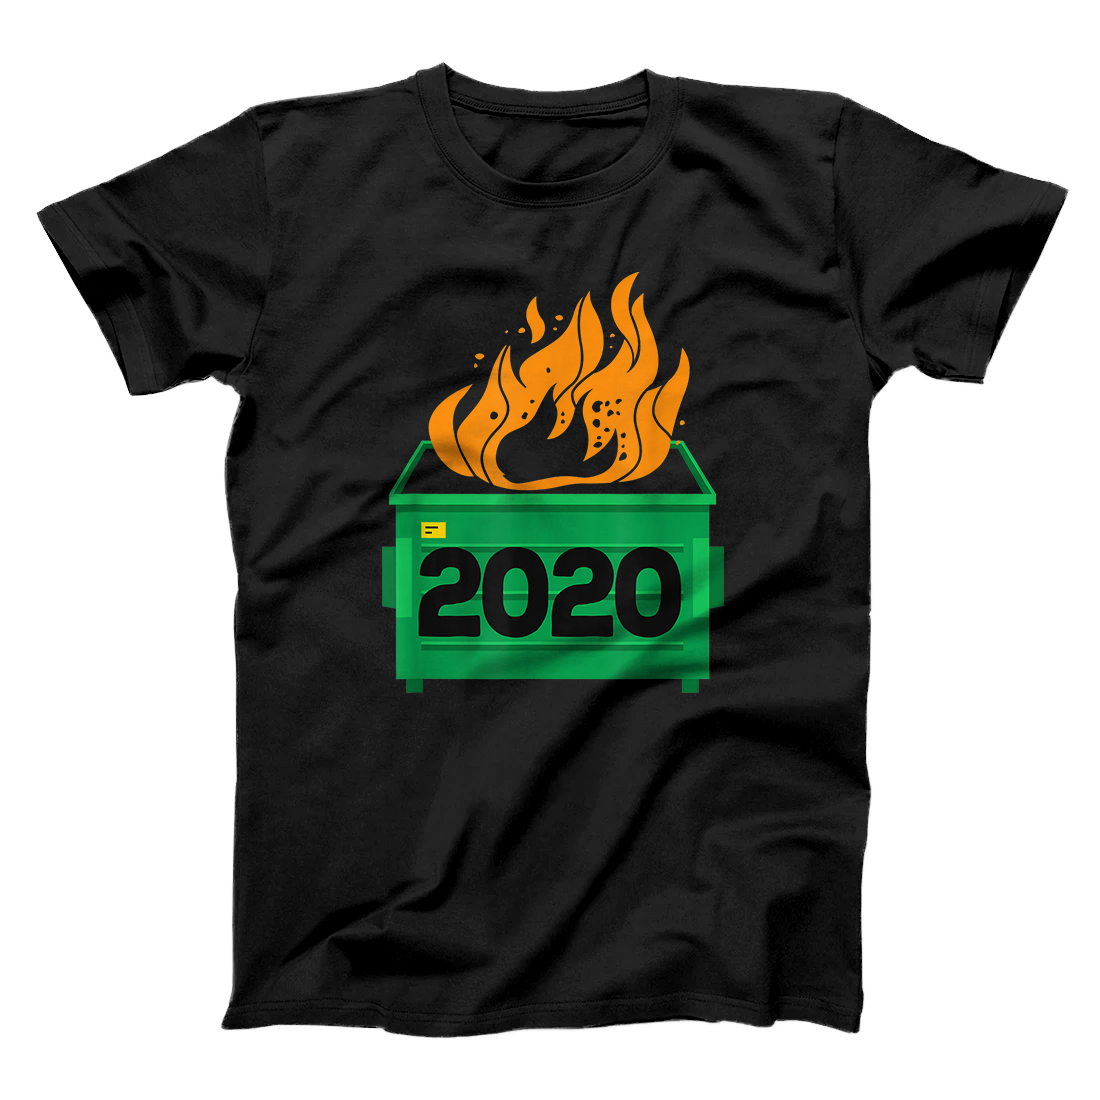 Personalized Dumpster Fire 2020 Sucks Funny Trash Garbage Fire Worst Year T-Shirt